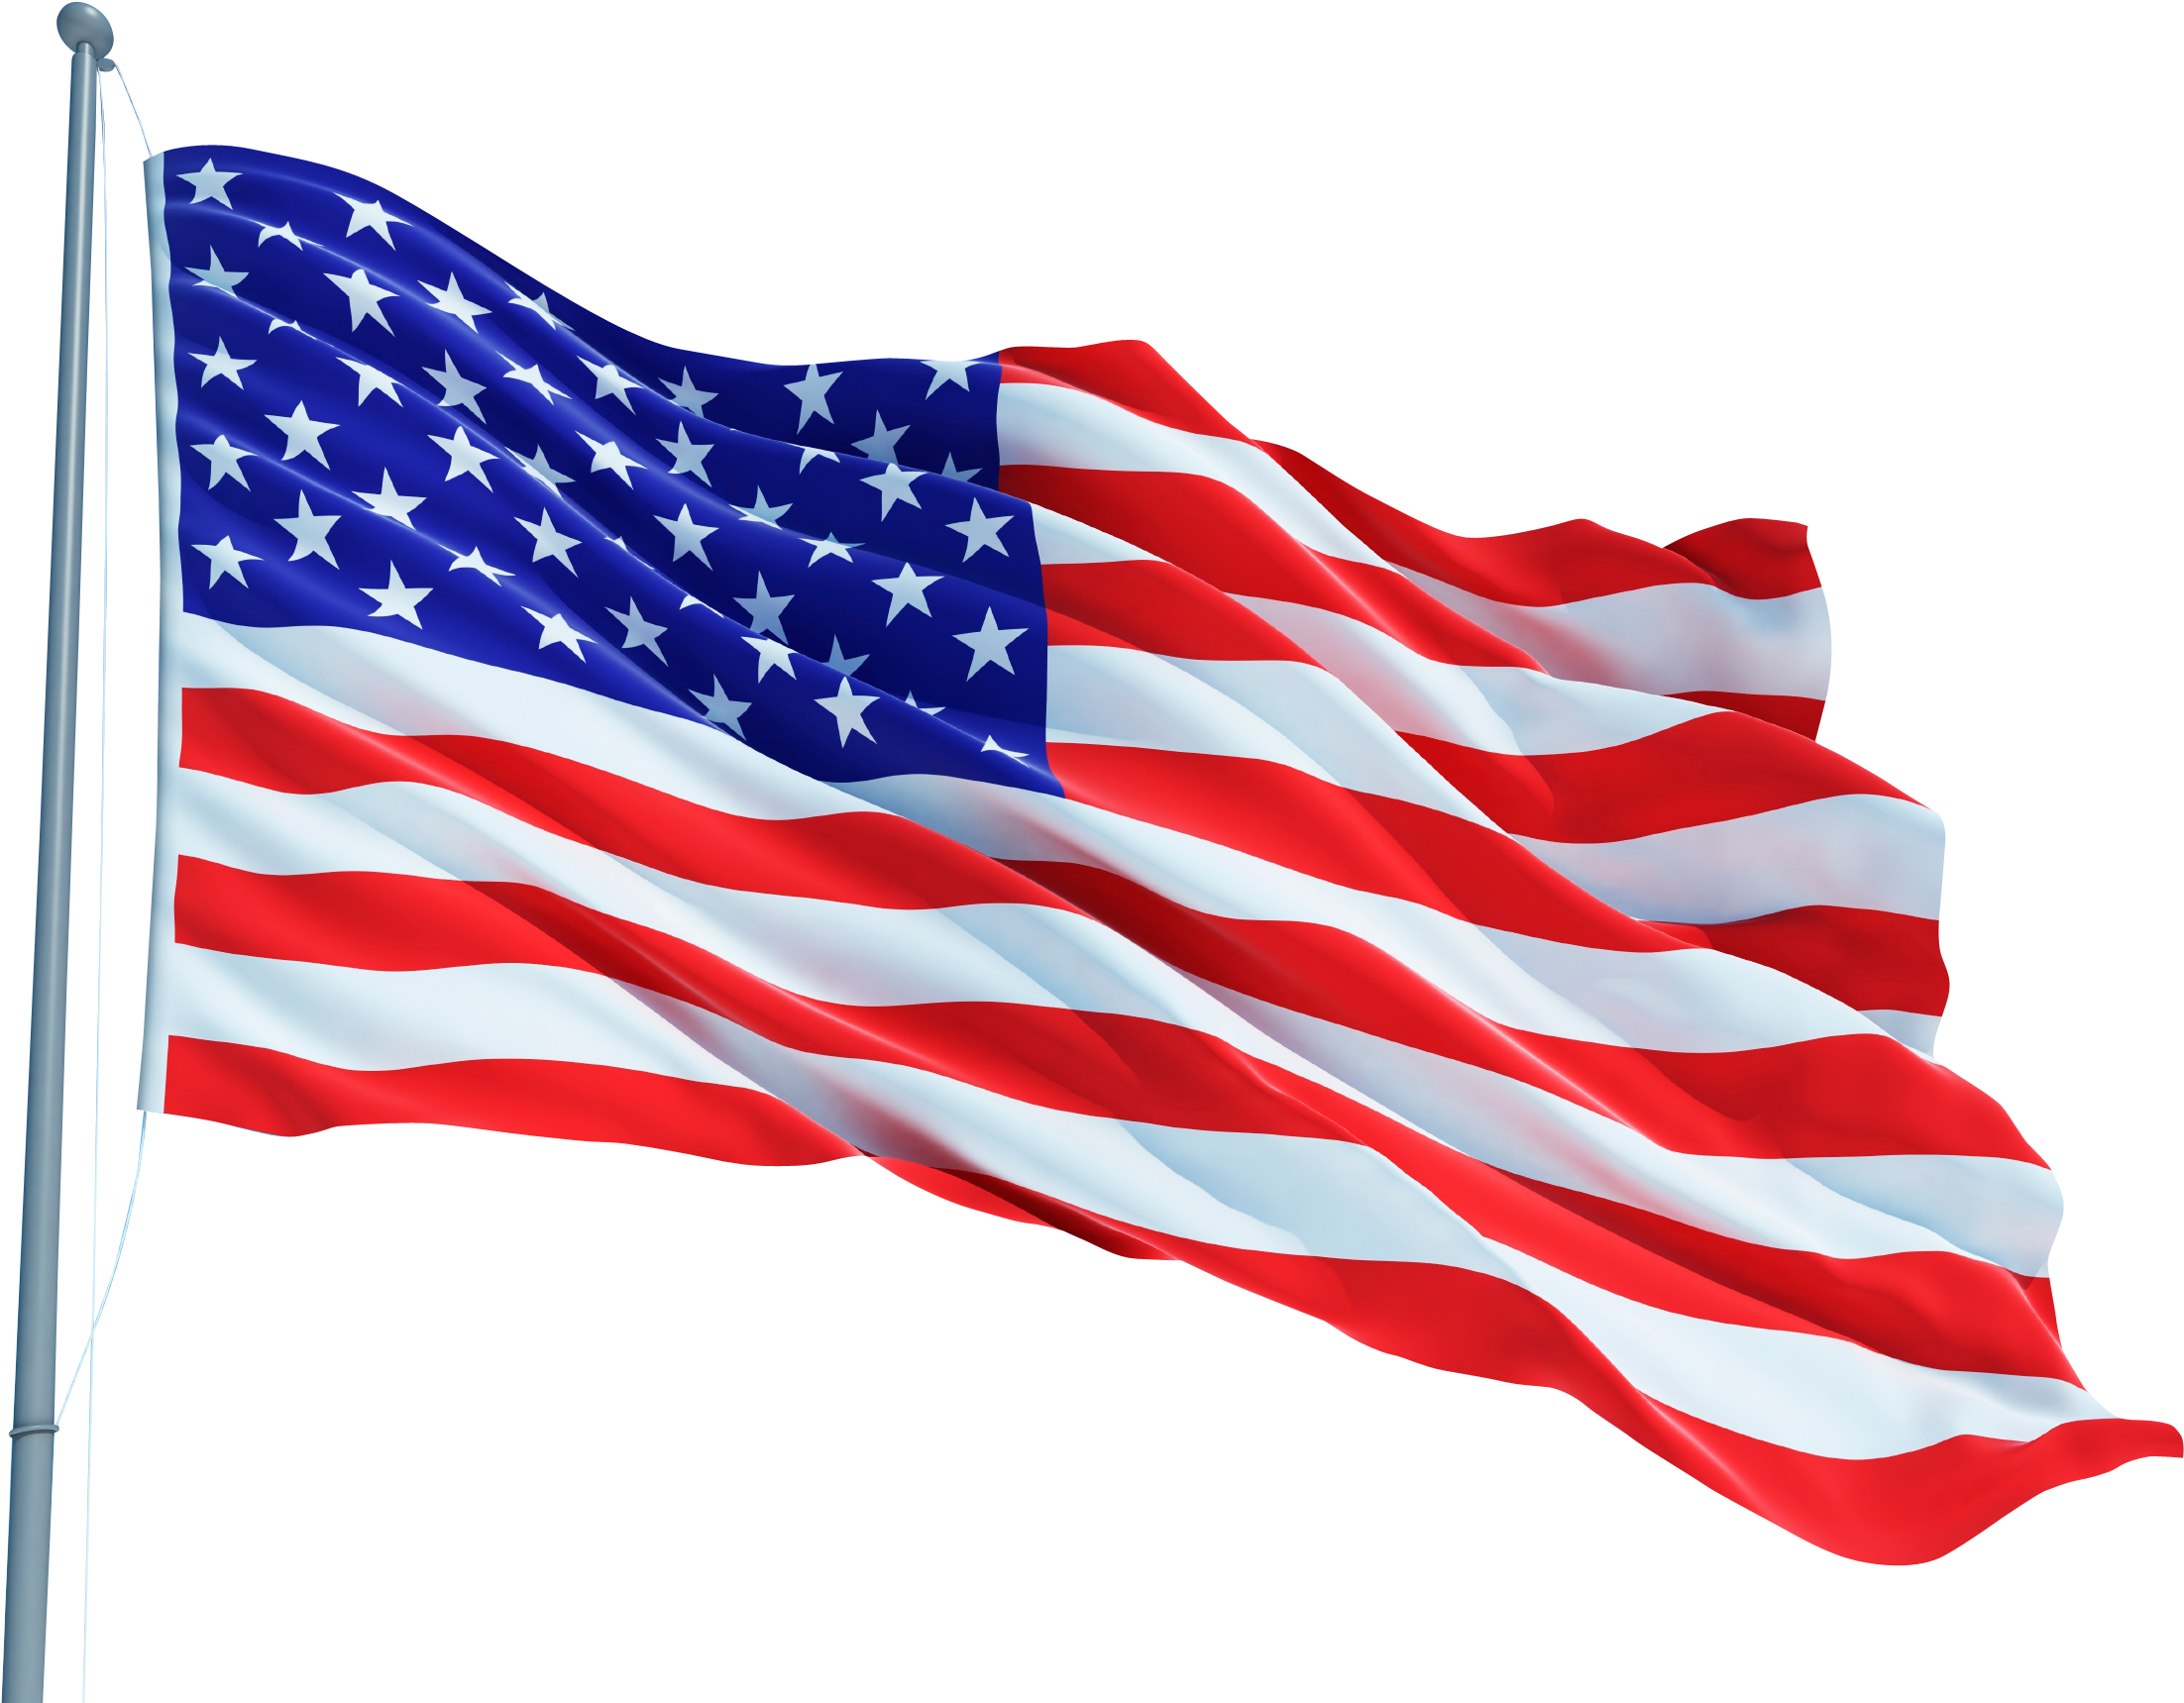 Sydney Wolfe Photo - Png Transparent American Flag (2611x1808)